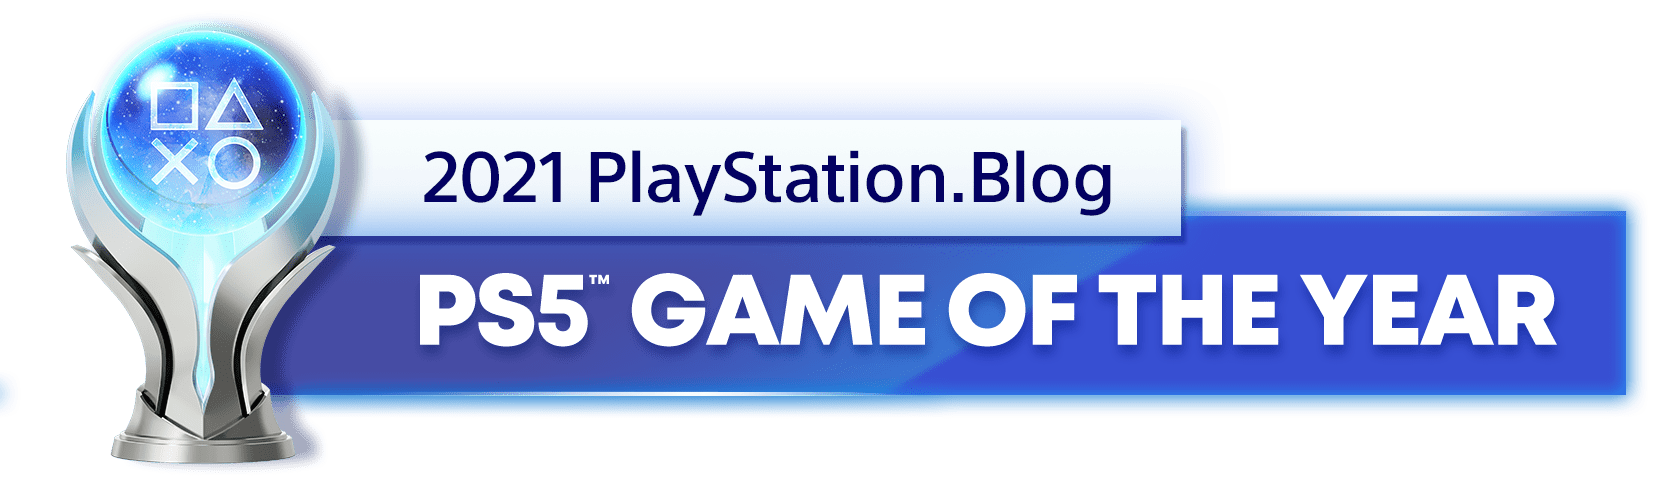 0b34b3b66a0456061a8f12ff21e93e5912e1a2a5 - PS.Blog: Gewinner der Game of the Year Awards 2021